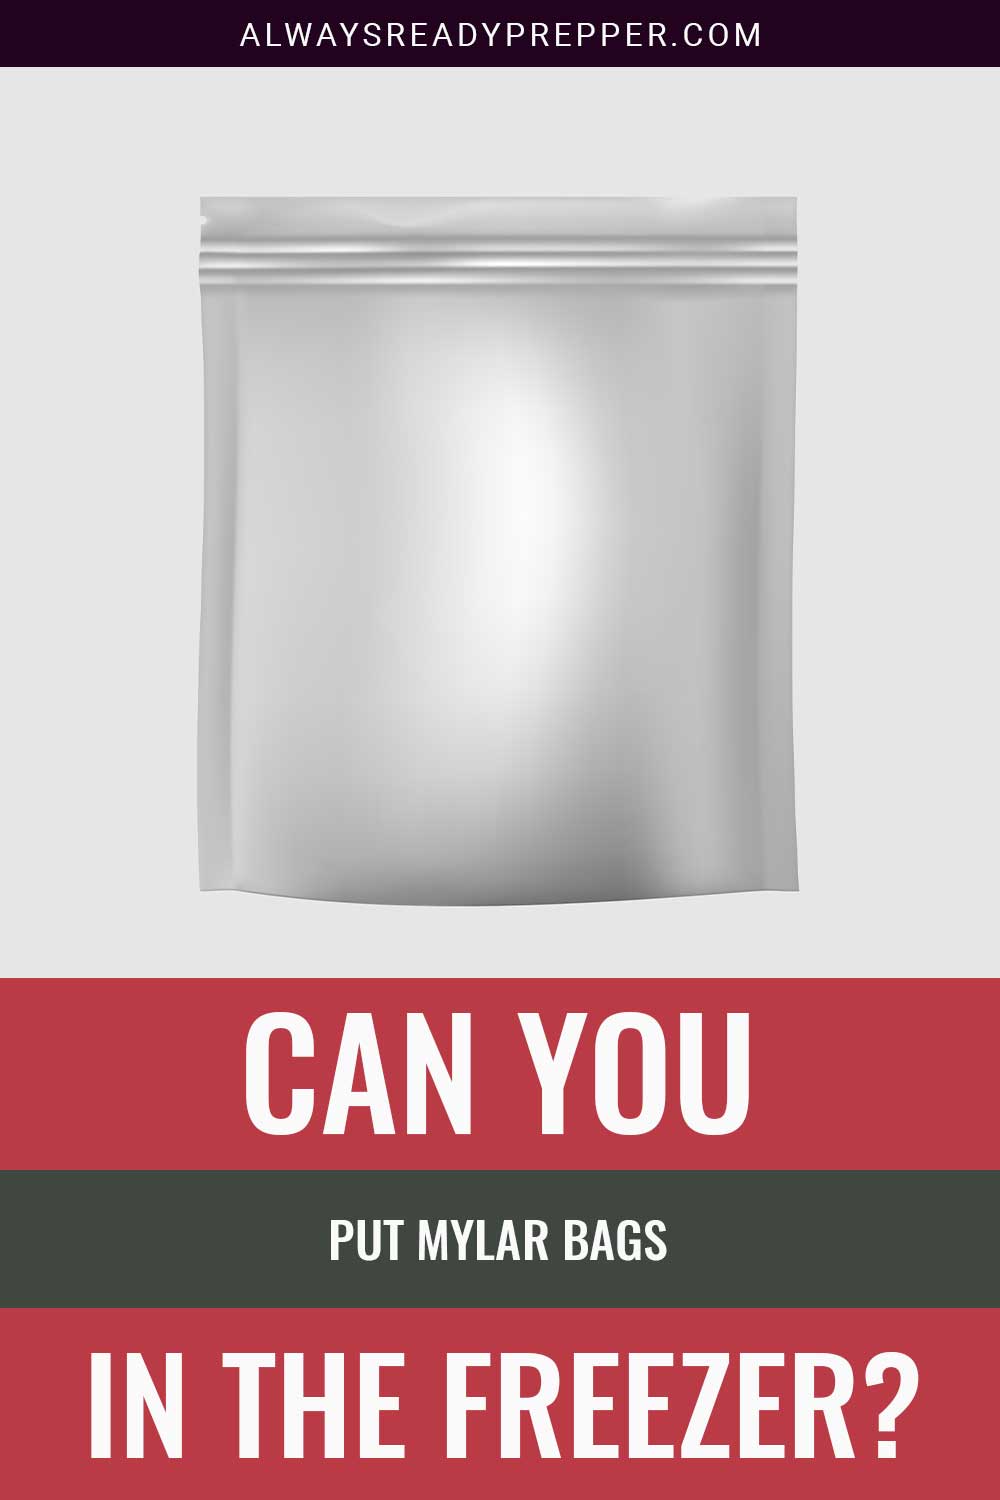 A metallic silver color mylar bag - can you put it in the freezer?